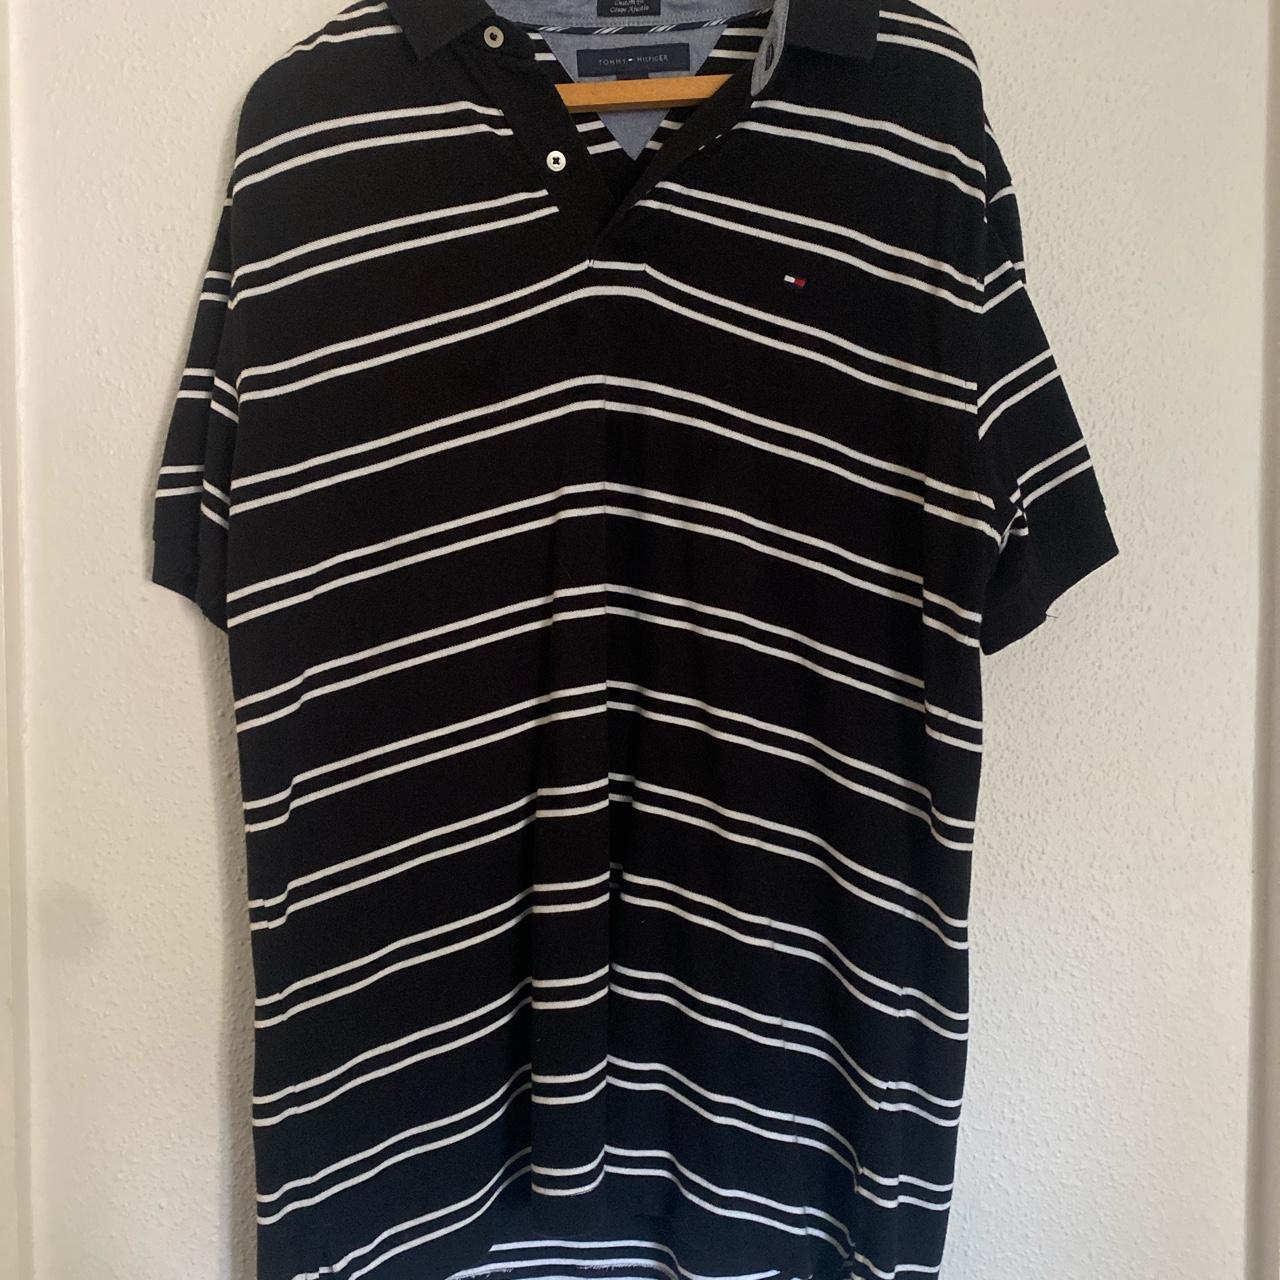 Hilfiger striped polo -Great condition -Size XL,... - Depop